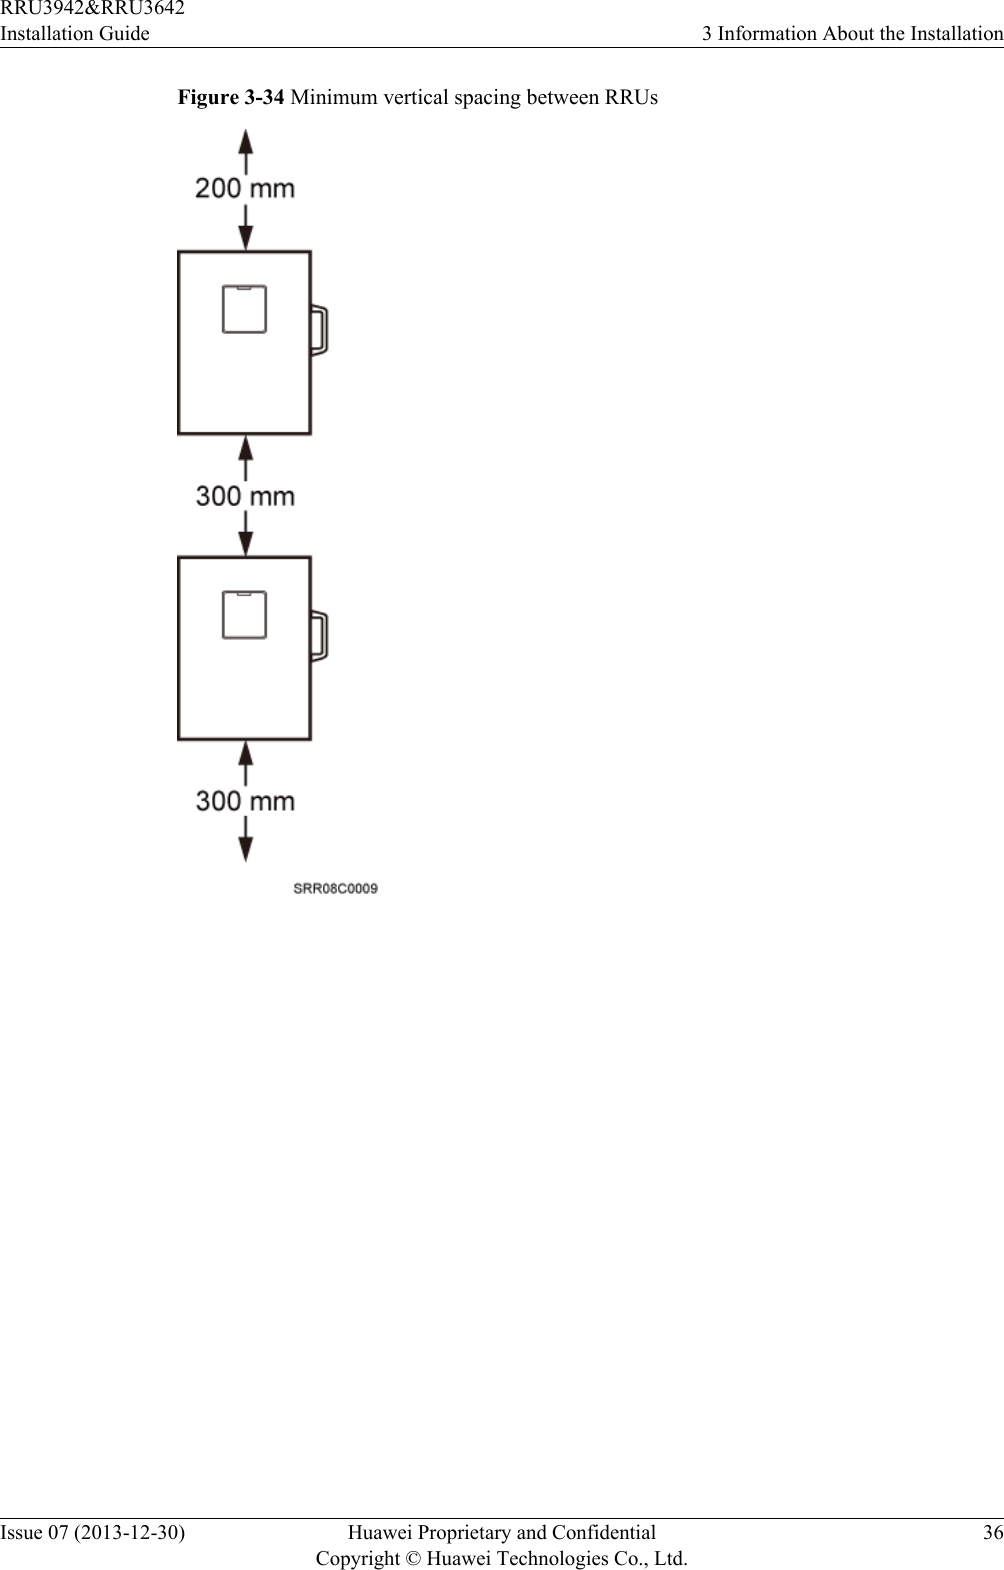 Figure 3-34 Minimum vertical spacing between RRUsRRU3942&amp;RRU3642Installation Guide 3 Information About the InstallationIssue 07 (2013-12-30) Huawei Proprietary and ConfidentialCopyright © Huawei Technologies Co., Ltd.36